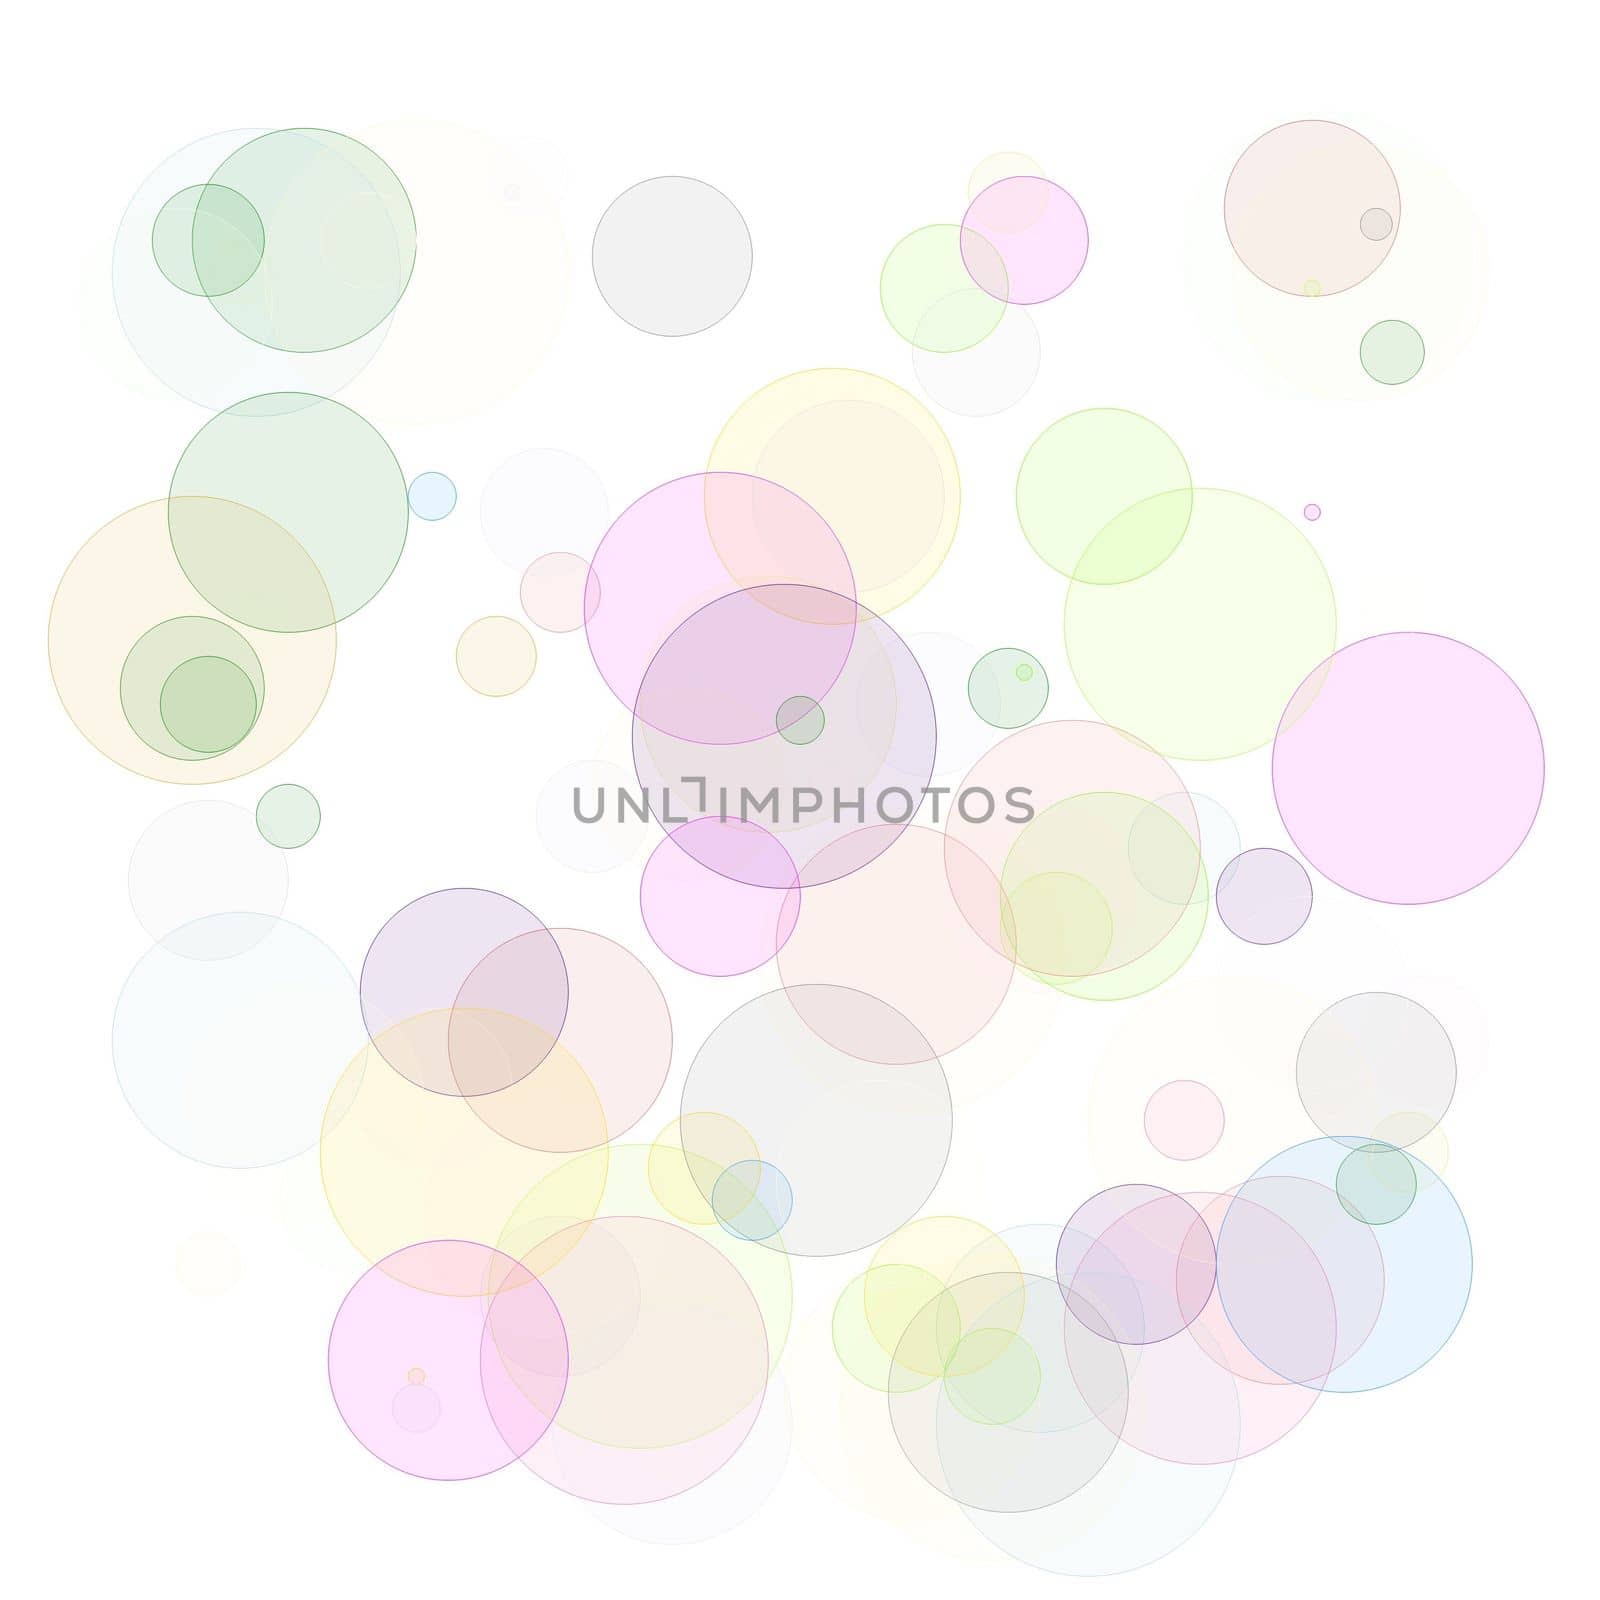 Abstract minimalist blue pink grey white yellow green red violet illustration with circles and white background